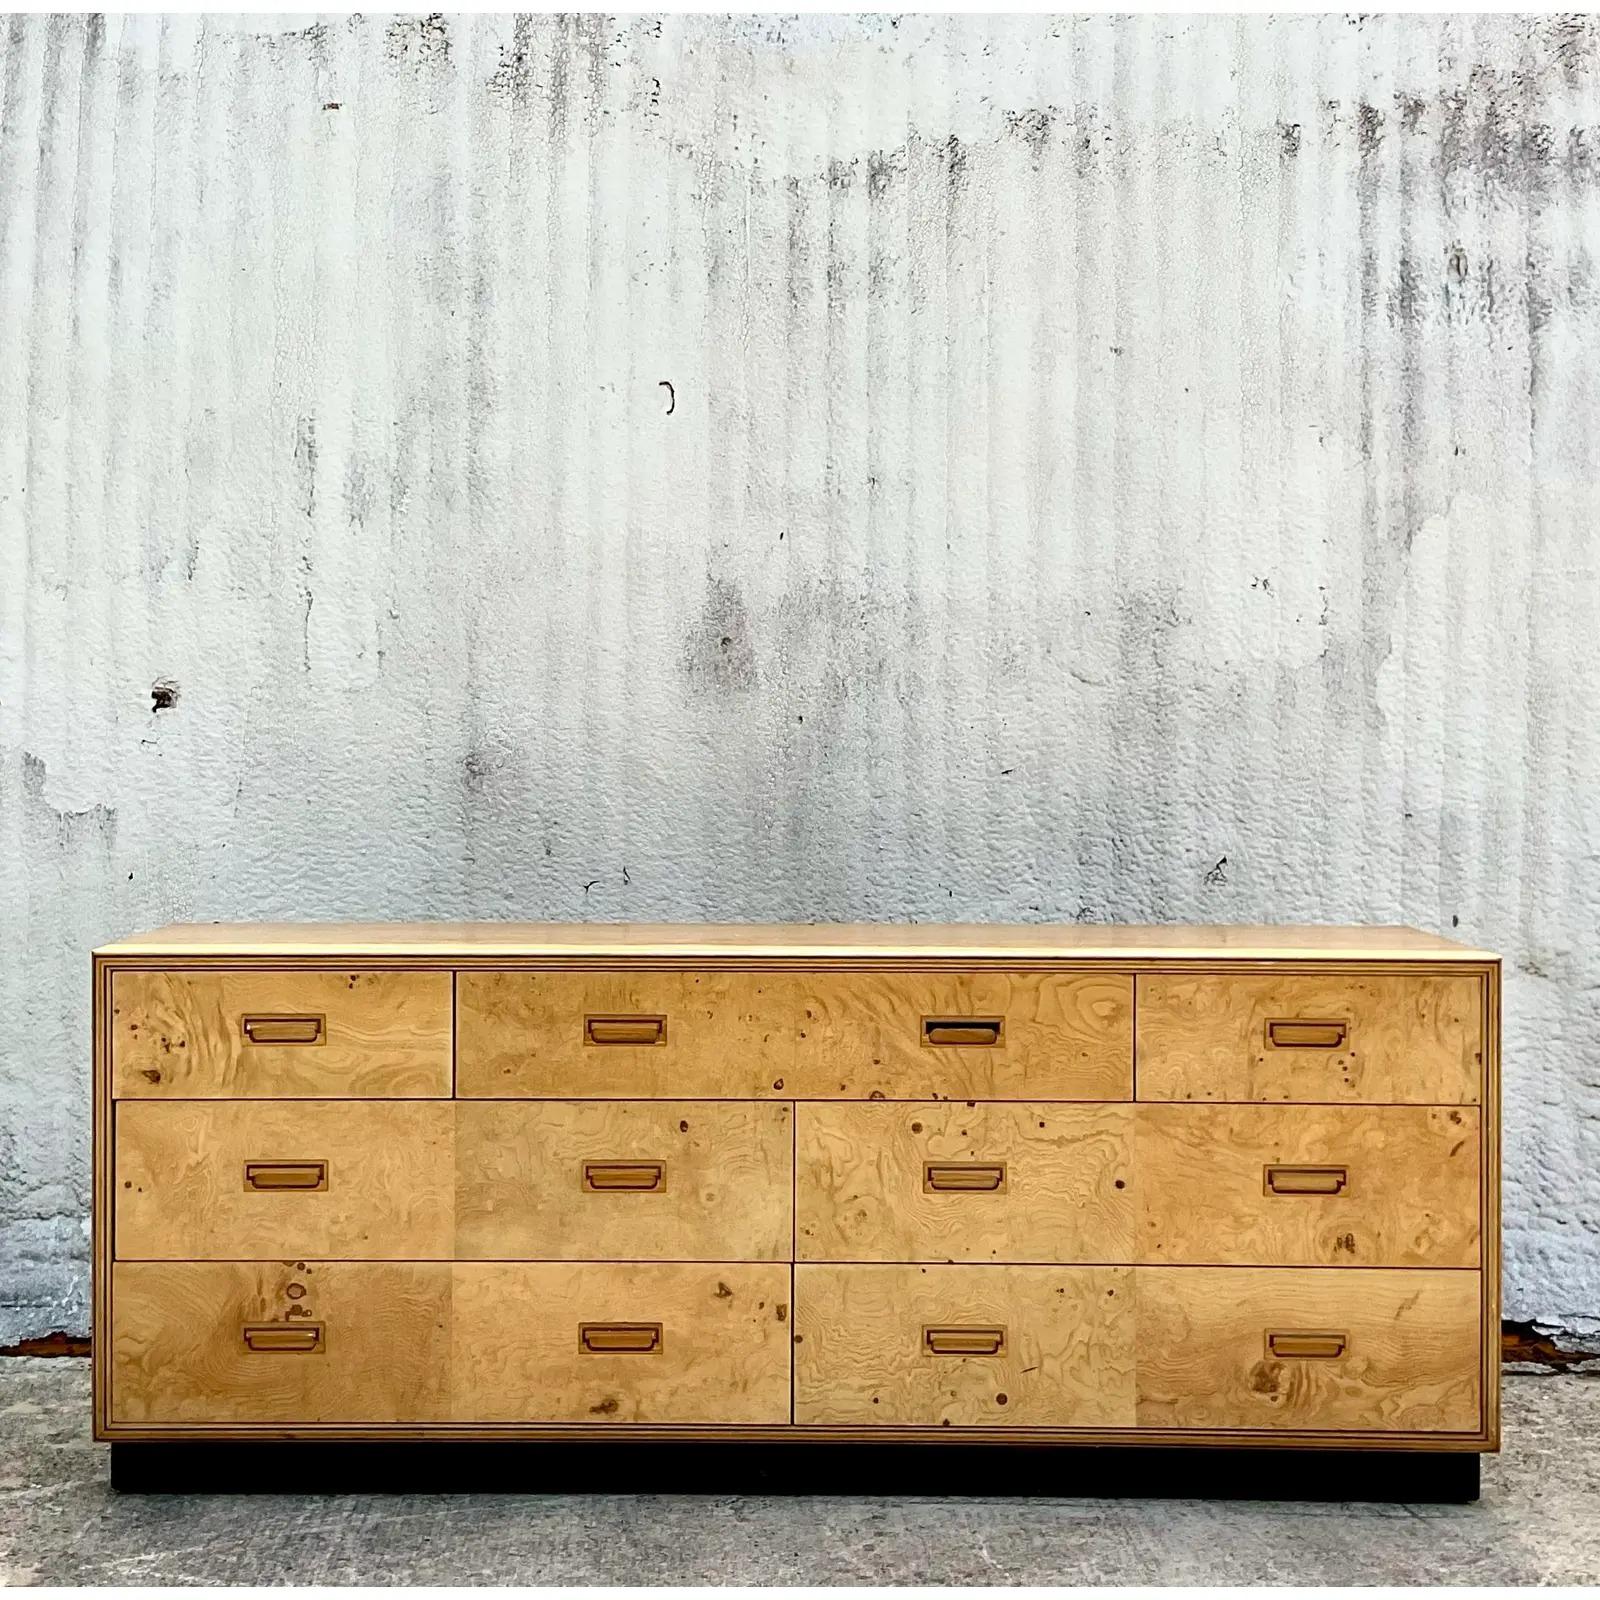 Incredible vintage MCM 9 drawer dresser. Made by the iconic Henredon group and marked on the back. Beautiful Burl wood drawers fronts. Acquired from a Palm Beach estate.